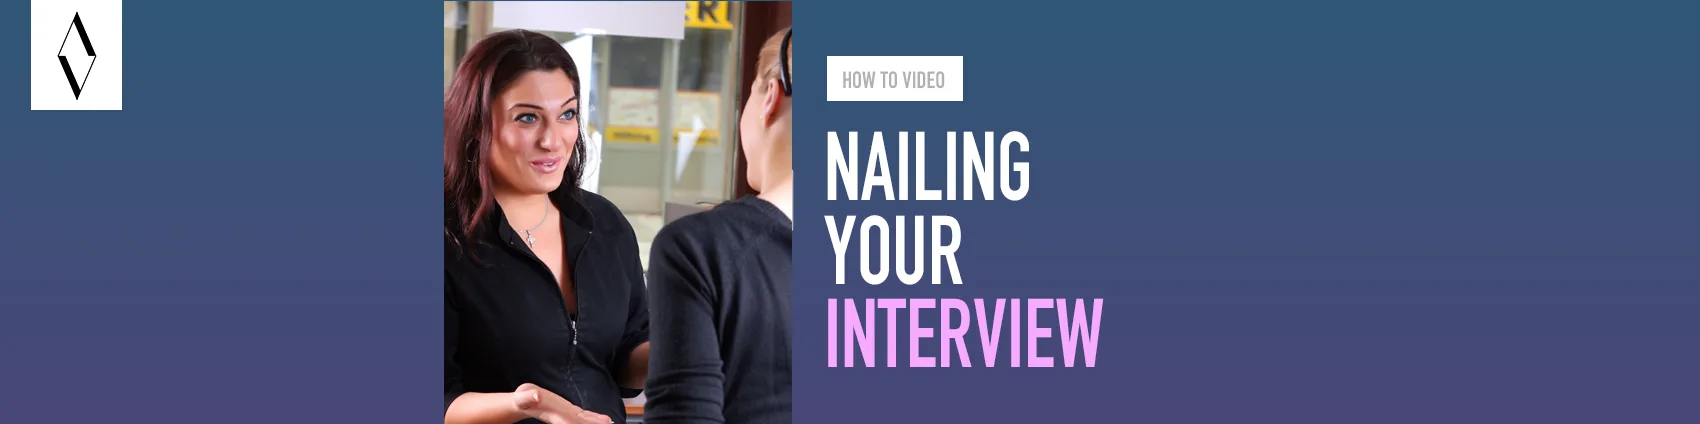 NEW* HOW TO SERIES: Nailing Your Interview